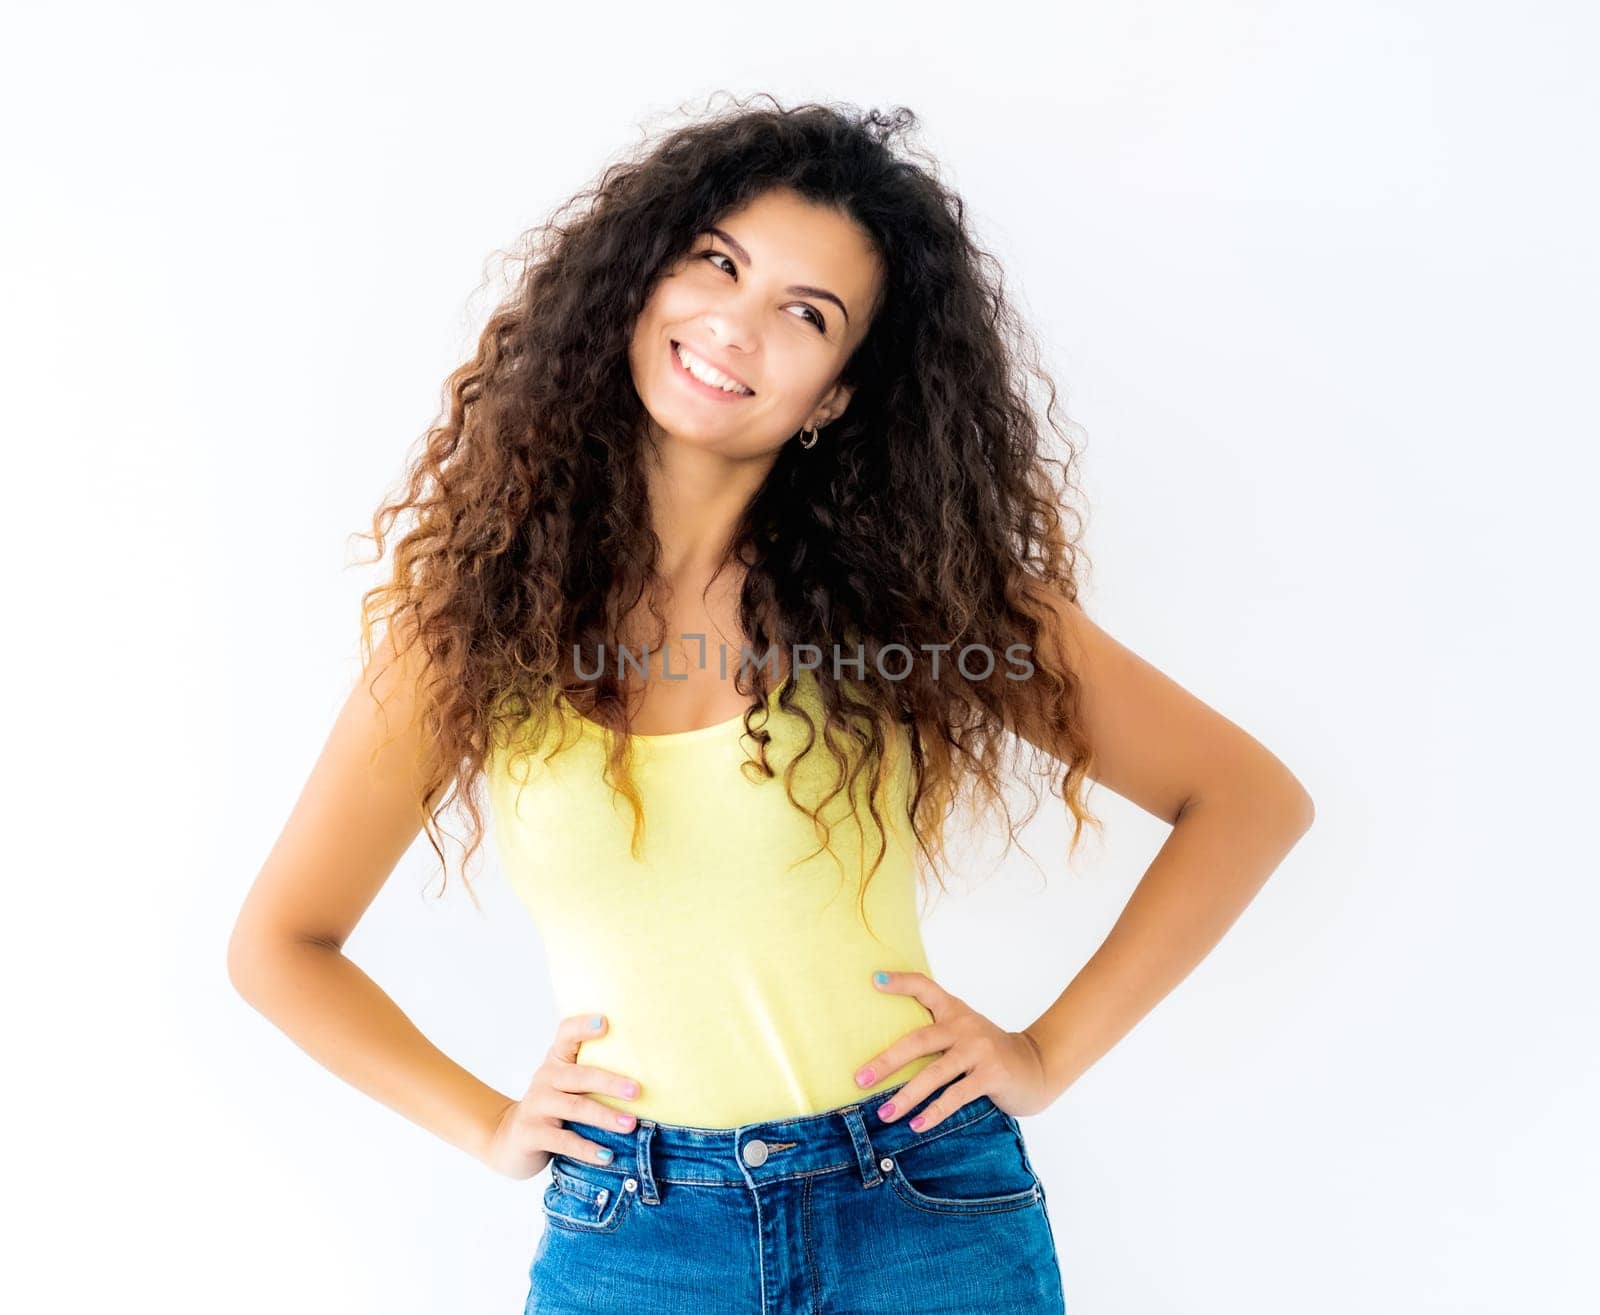 Beautiful smiling girl standing with hands on waist